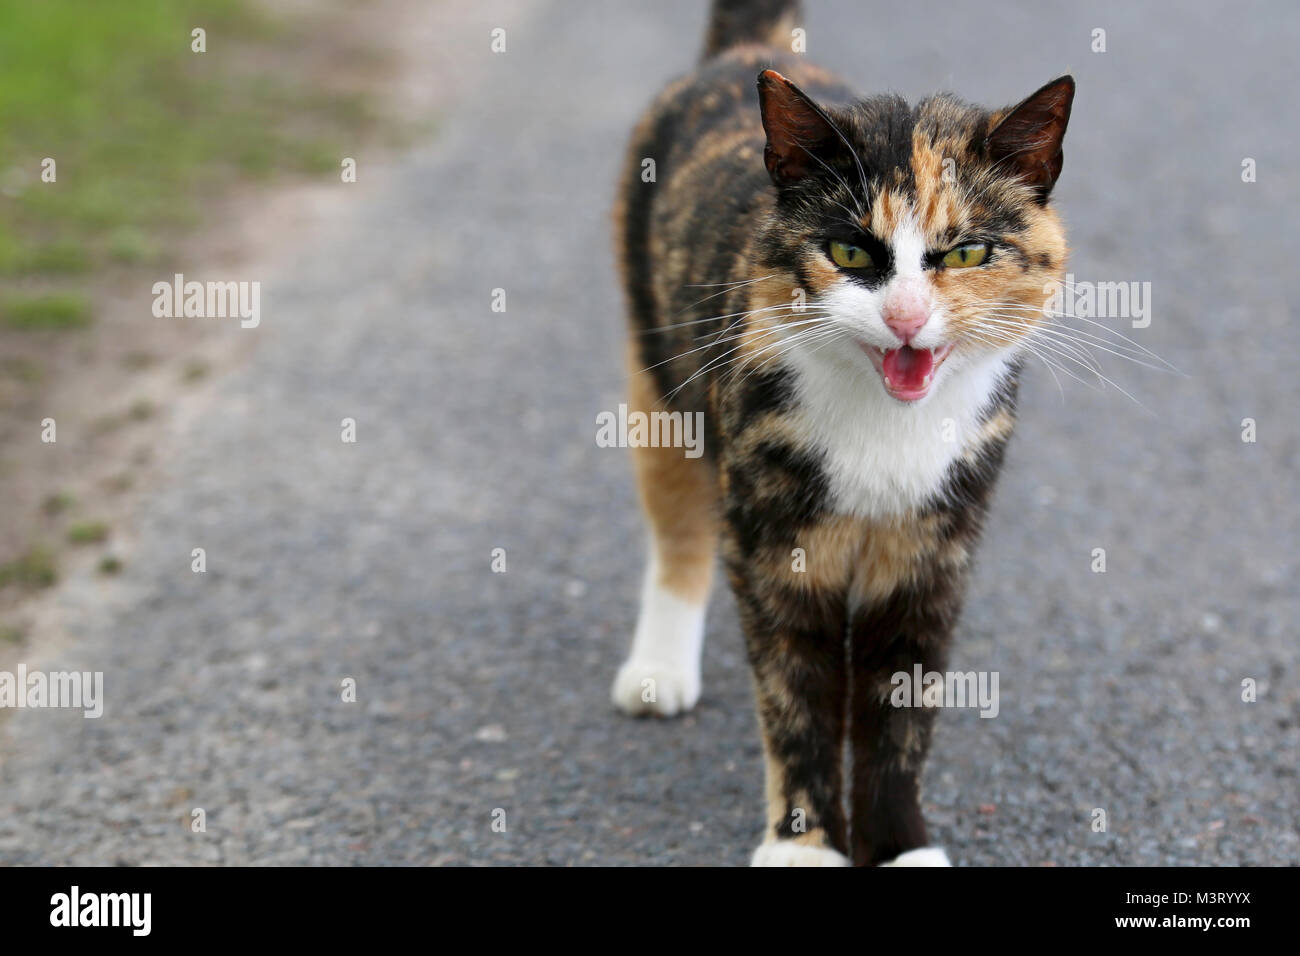 Very angry brown domestic cat standing on side of road, copy space on the left of the image. Stock Photo